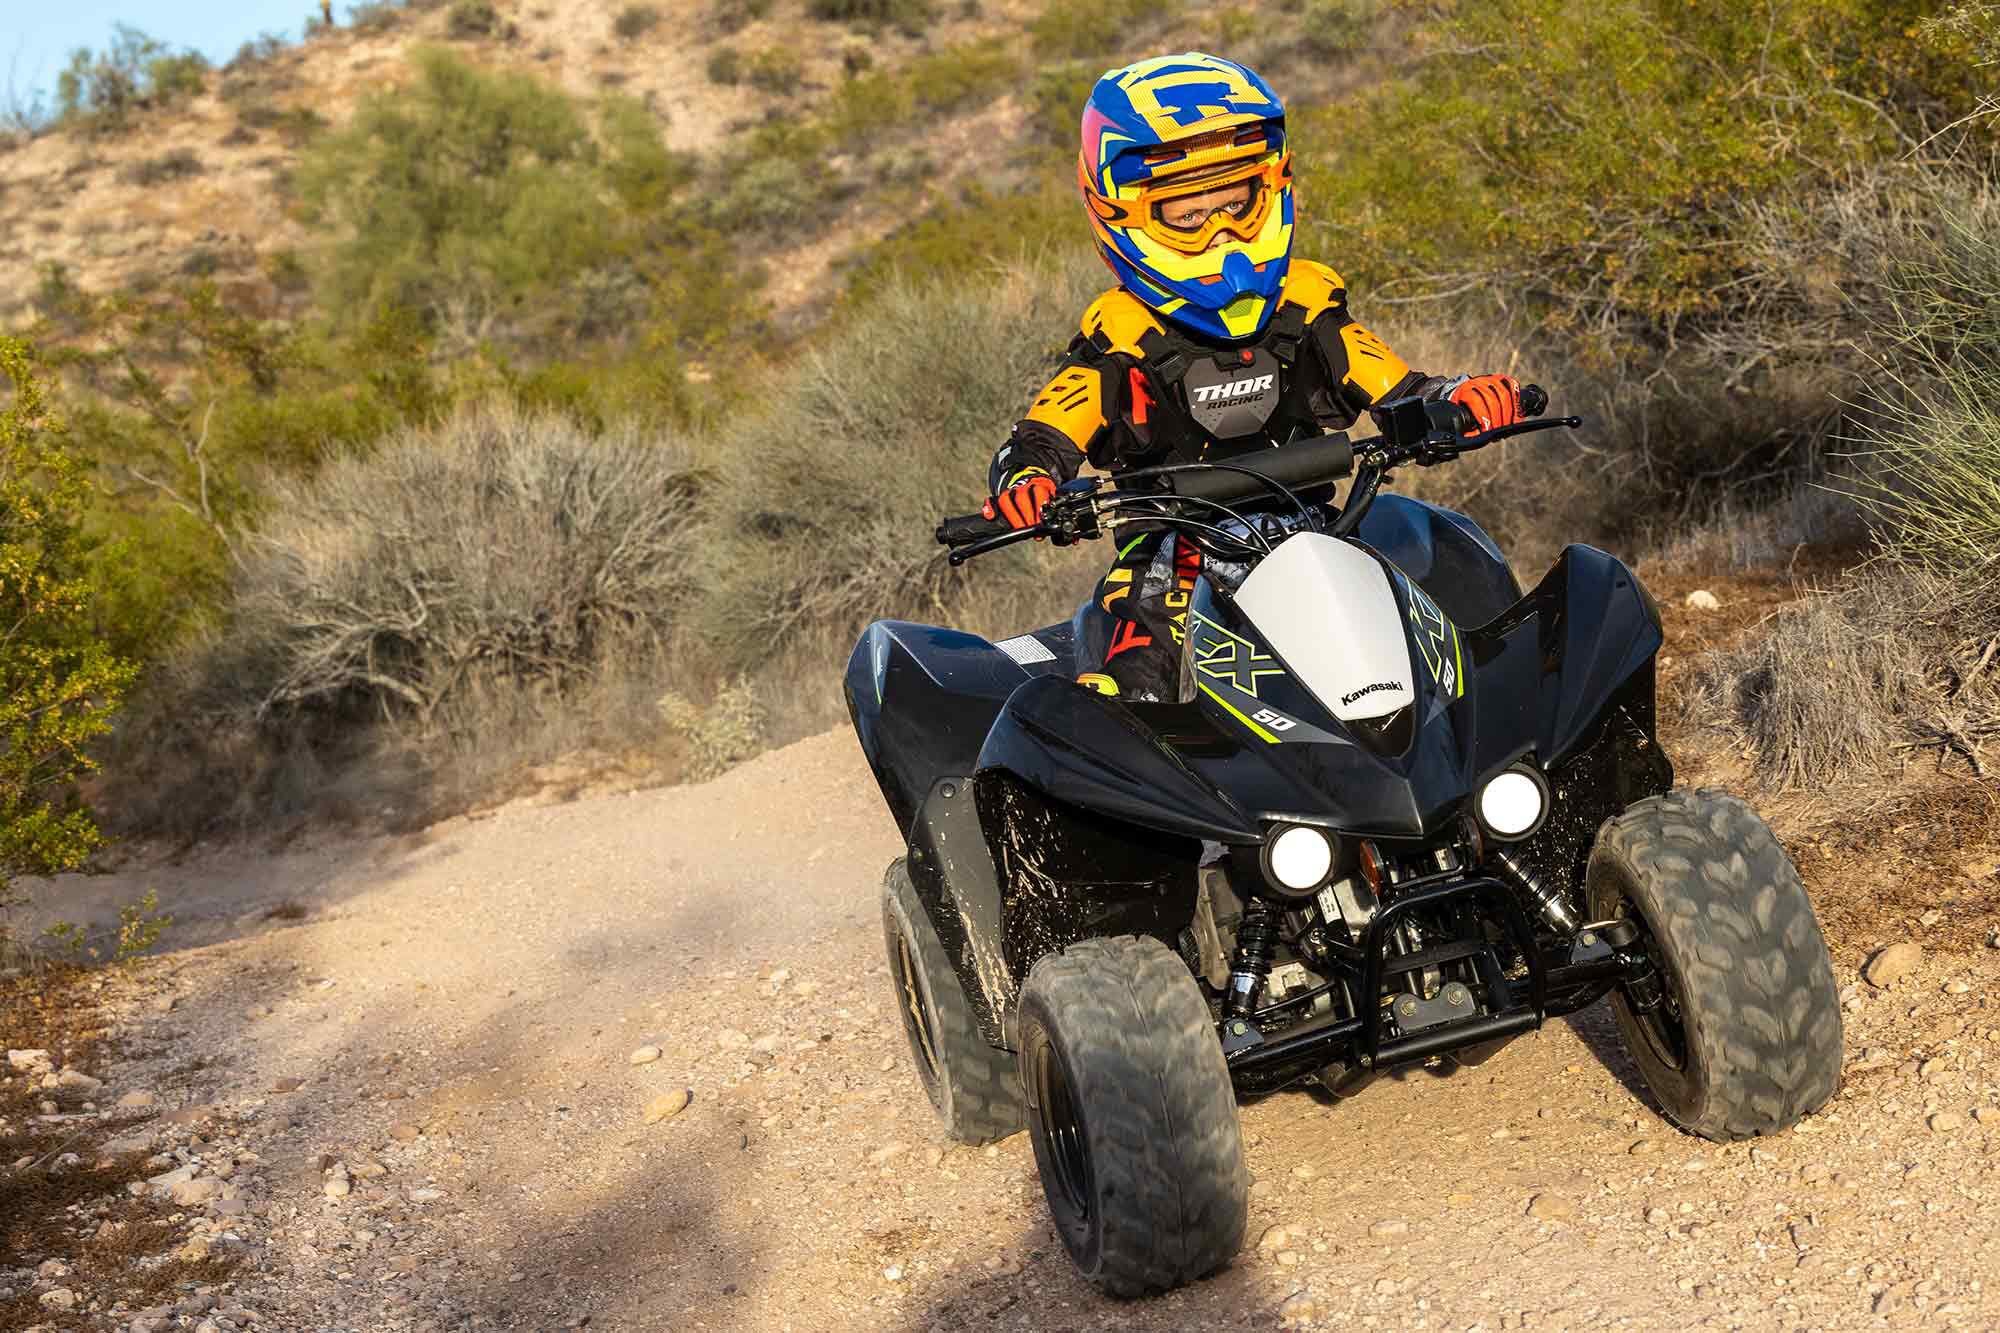 Built for riders aged 6 and up, the KFX50 is a great choice for teaching kids responsible ATV riding.